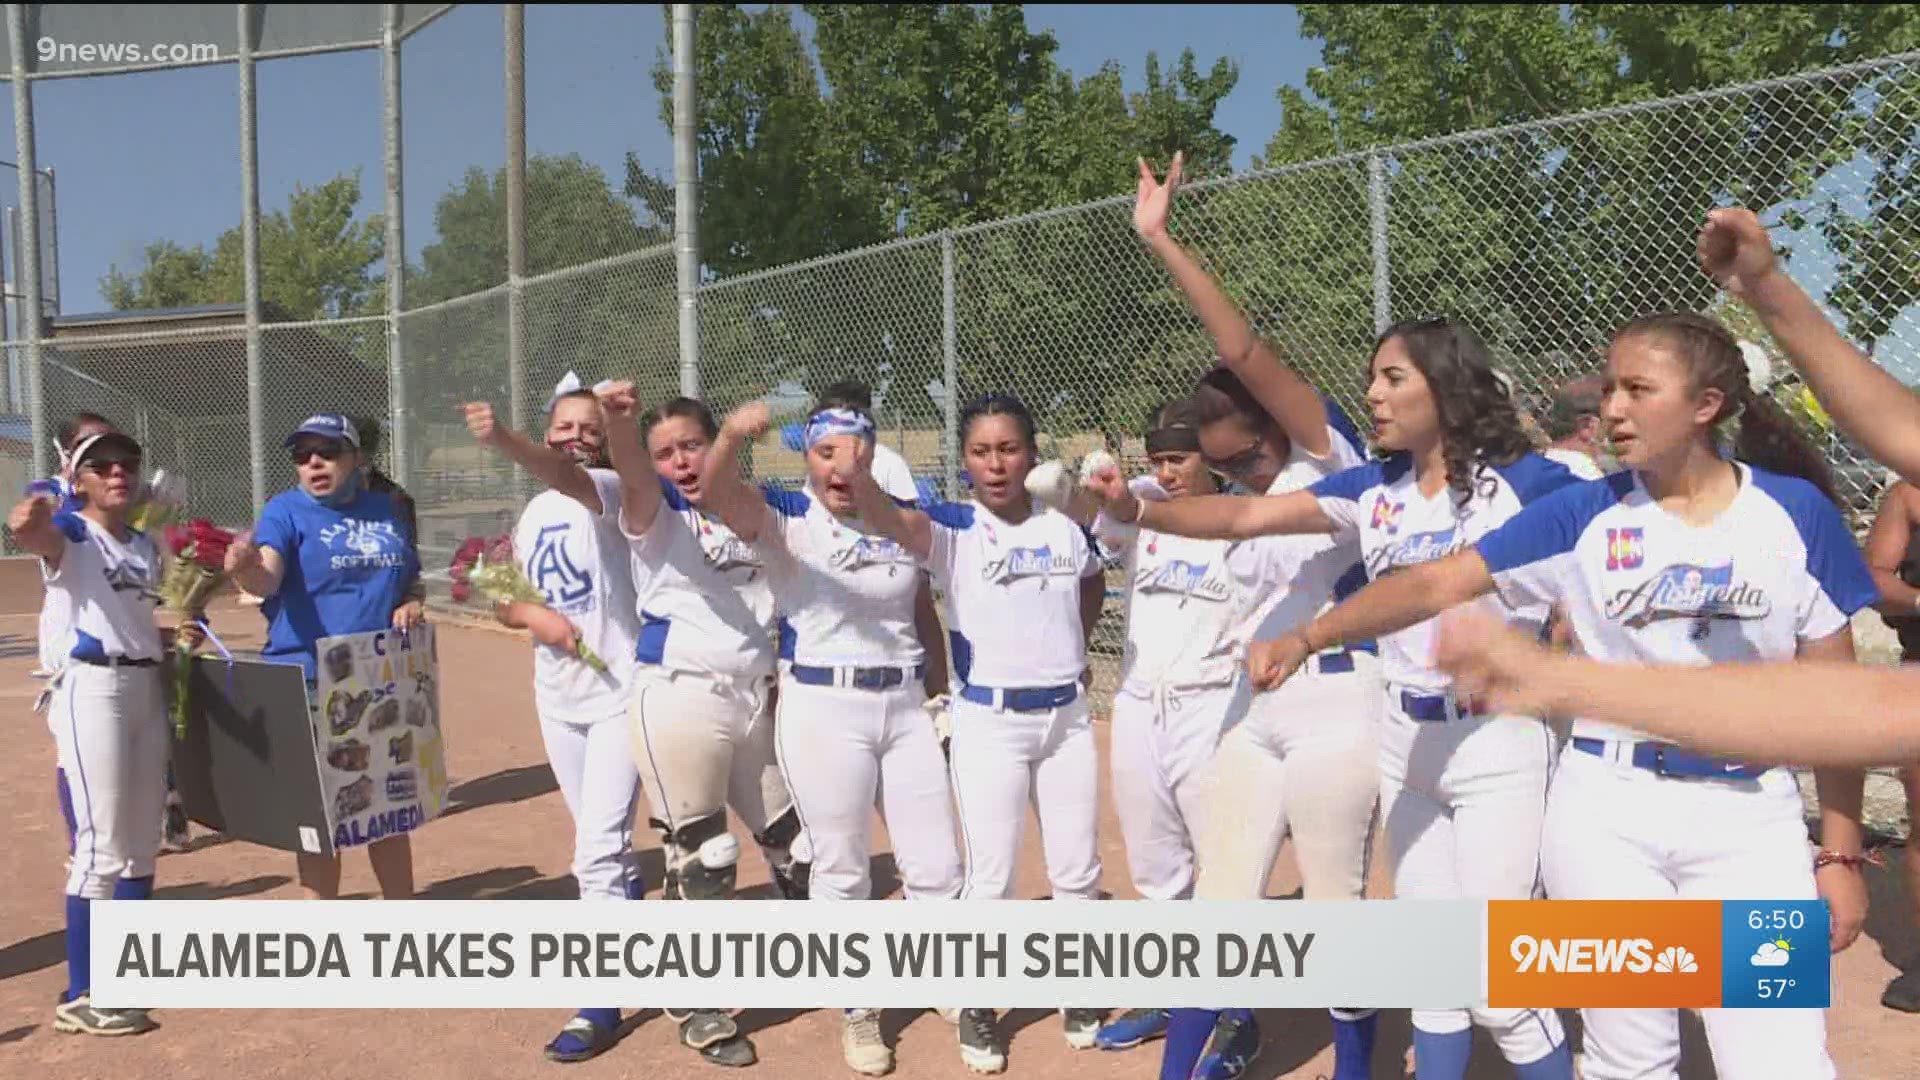 The Pirates refused to risk losing senior day due to a shortened or canceled season. Alameda celebrated seven seniors during its first home game of the season.